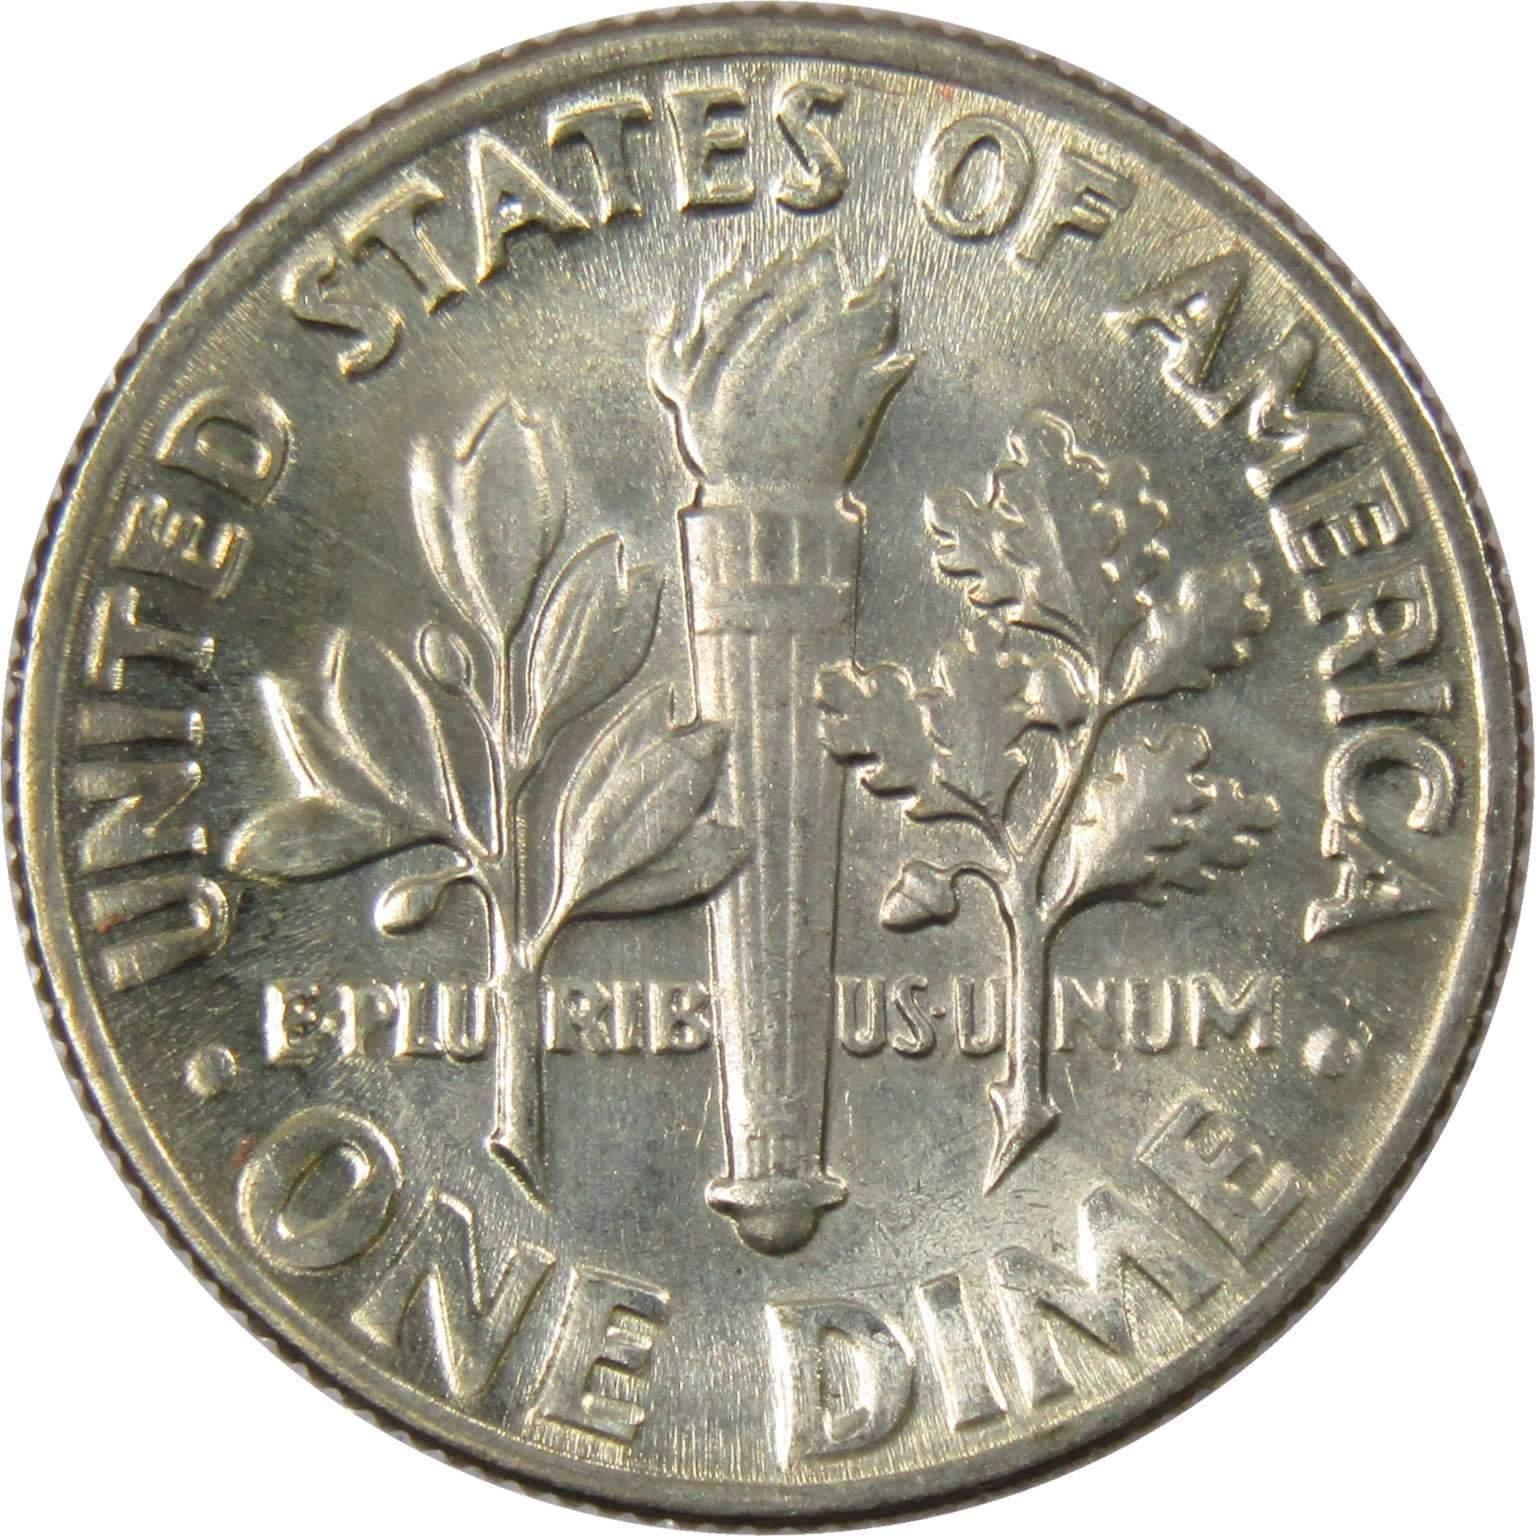 1973 Roosevelt Dime BU Uncirculated Mint State 10c US Coin Collectible